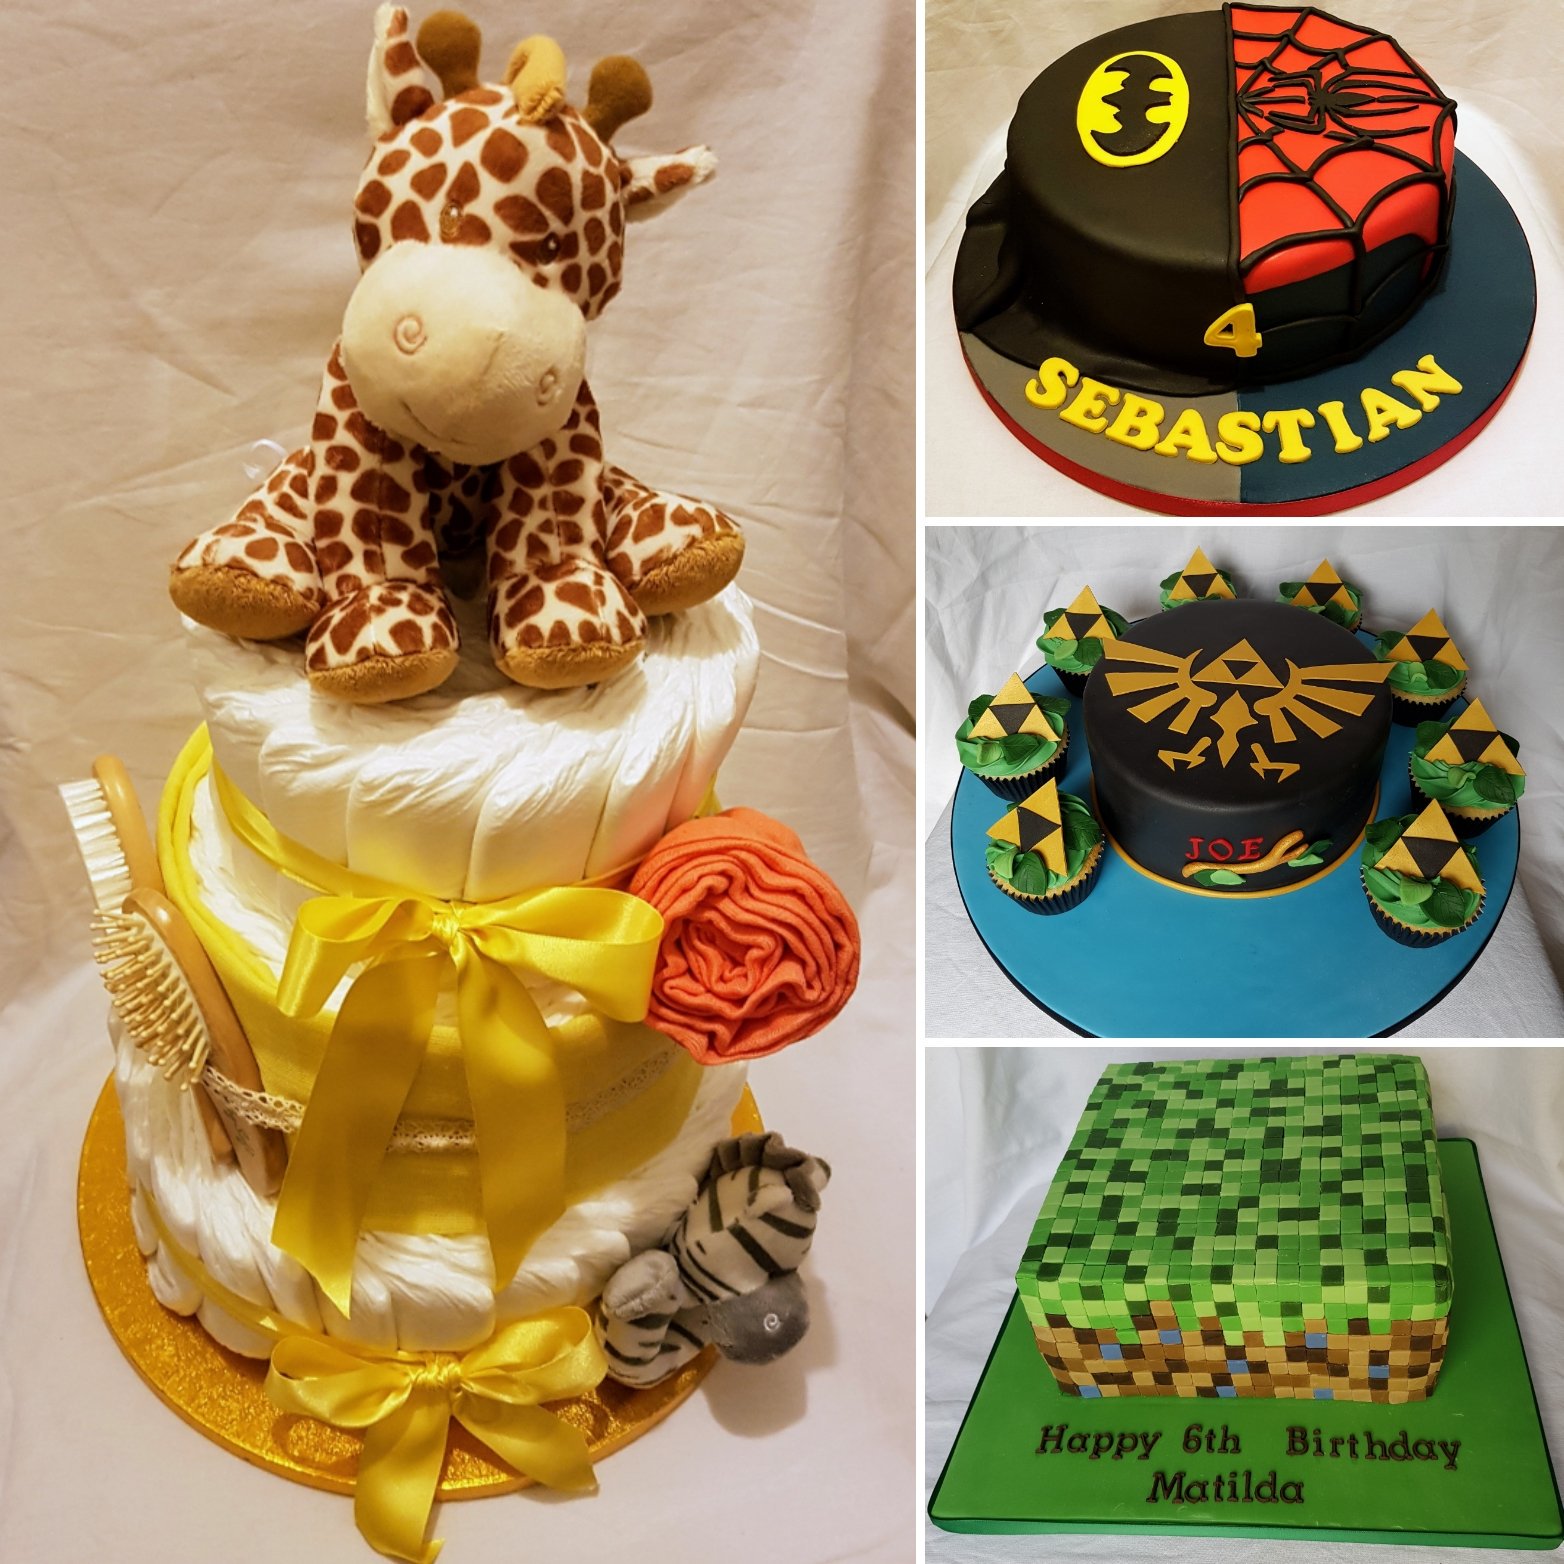 Beverley French On Twitter A Few Cake Orders From The Last